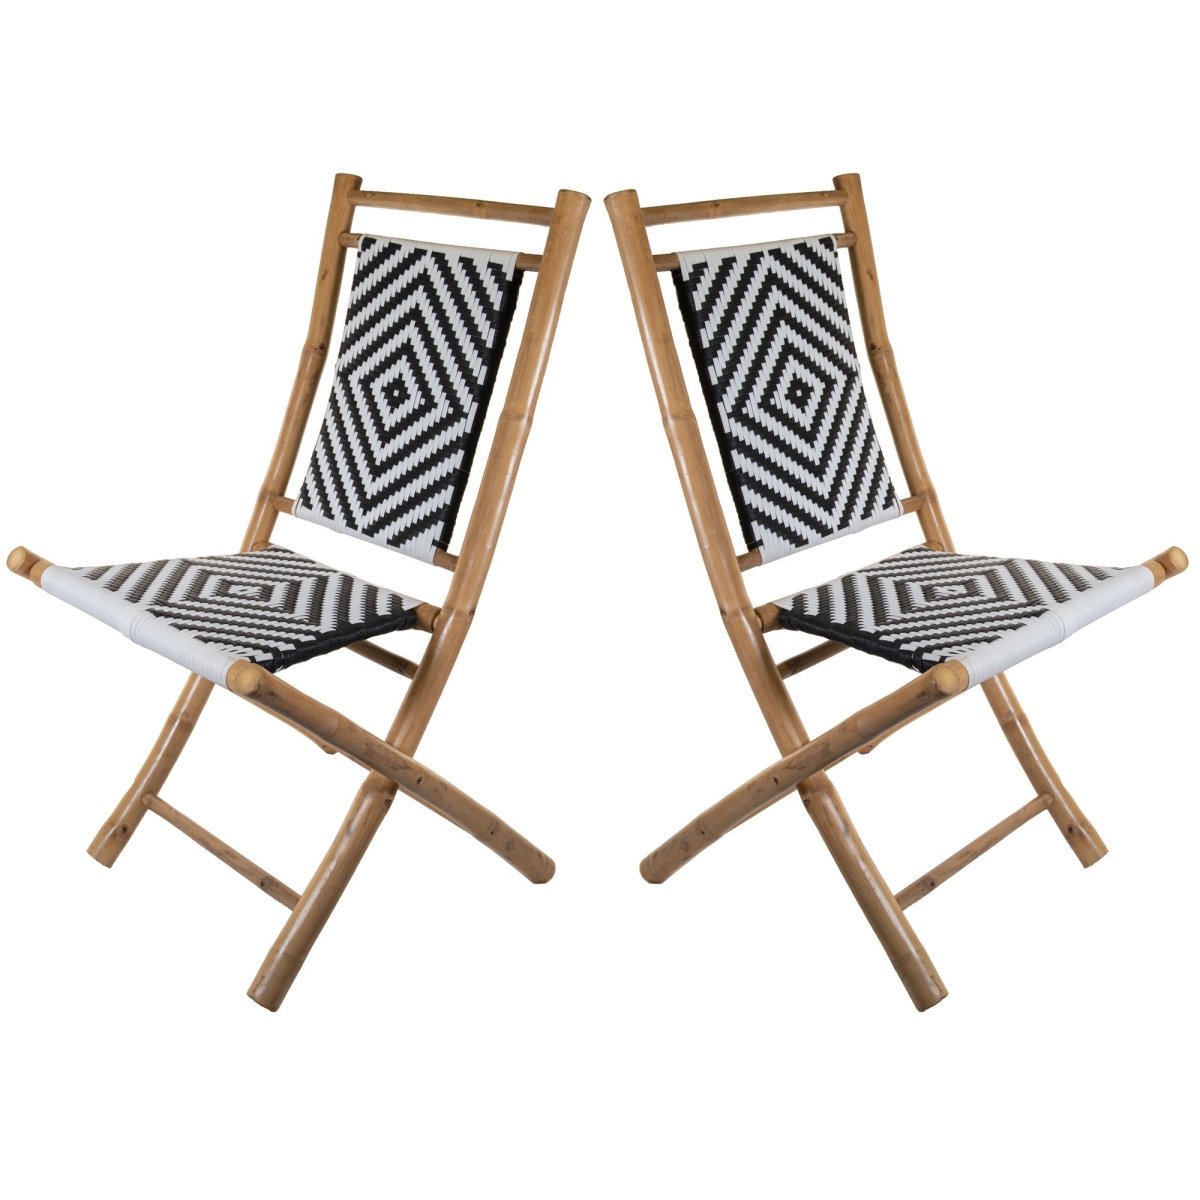 Home Roots 383048 Foldable Armless Chairs In Solid Bamboo Frame With Black & White Woven Seat, Set Of 2